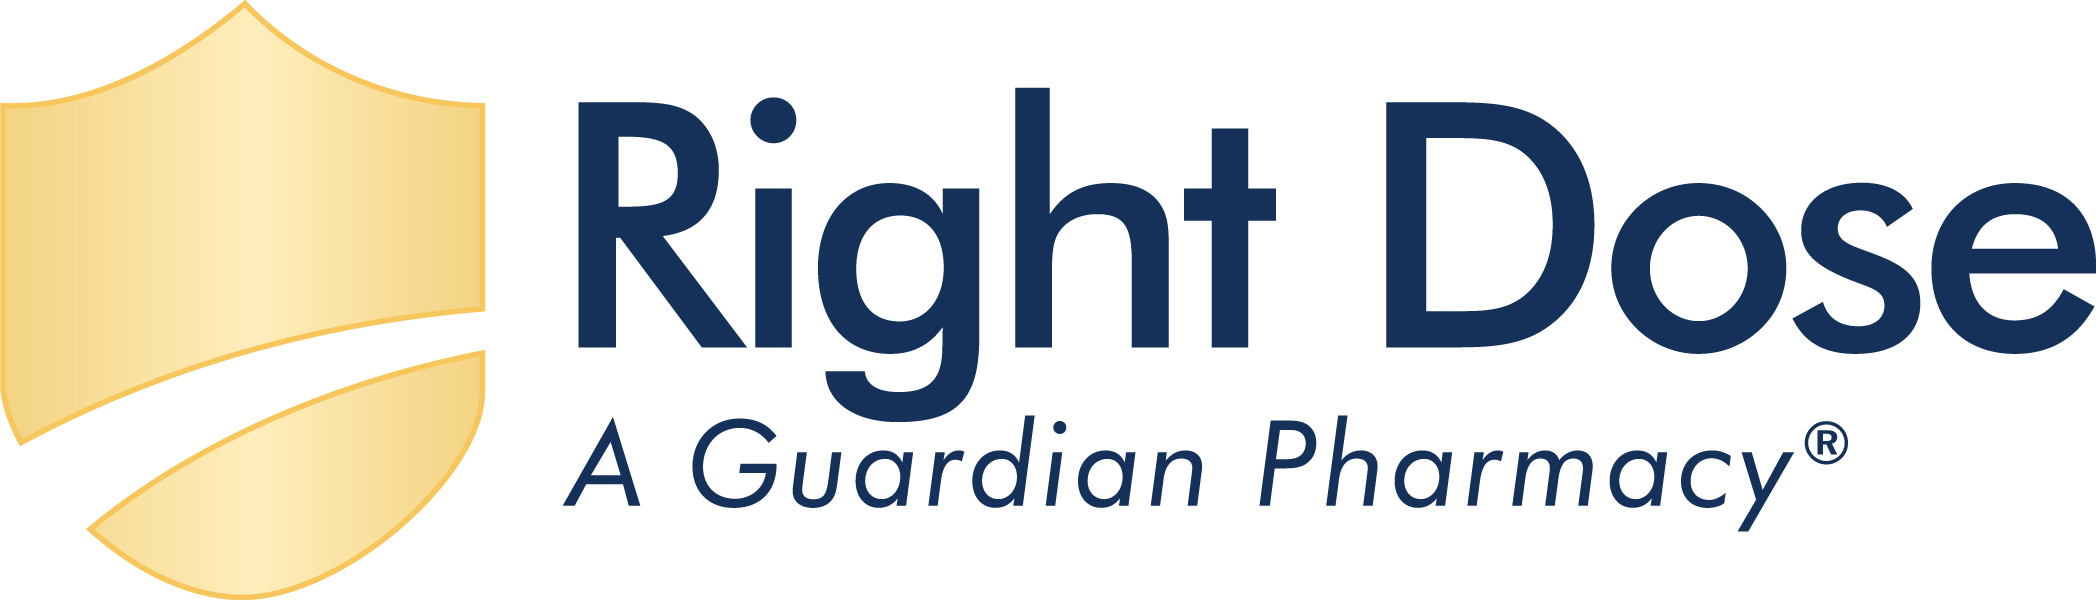 Right Dose, A Guardian Pharmacy